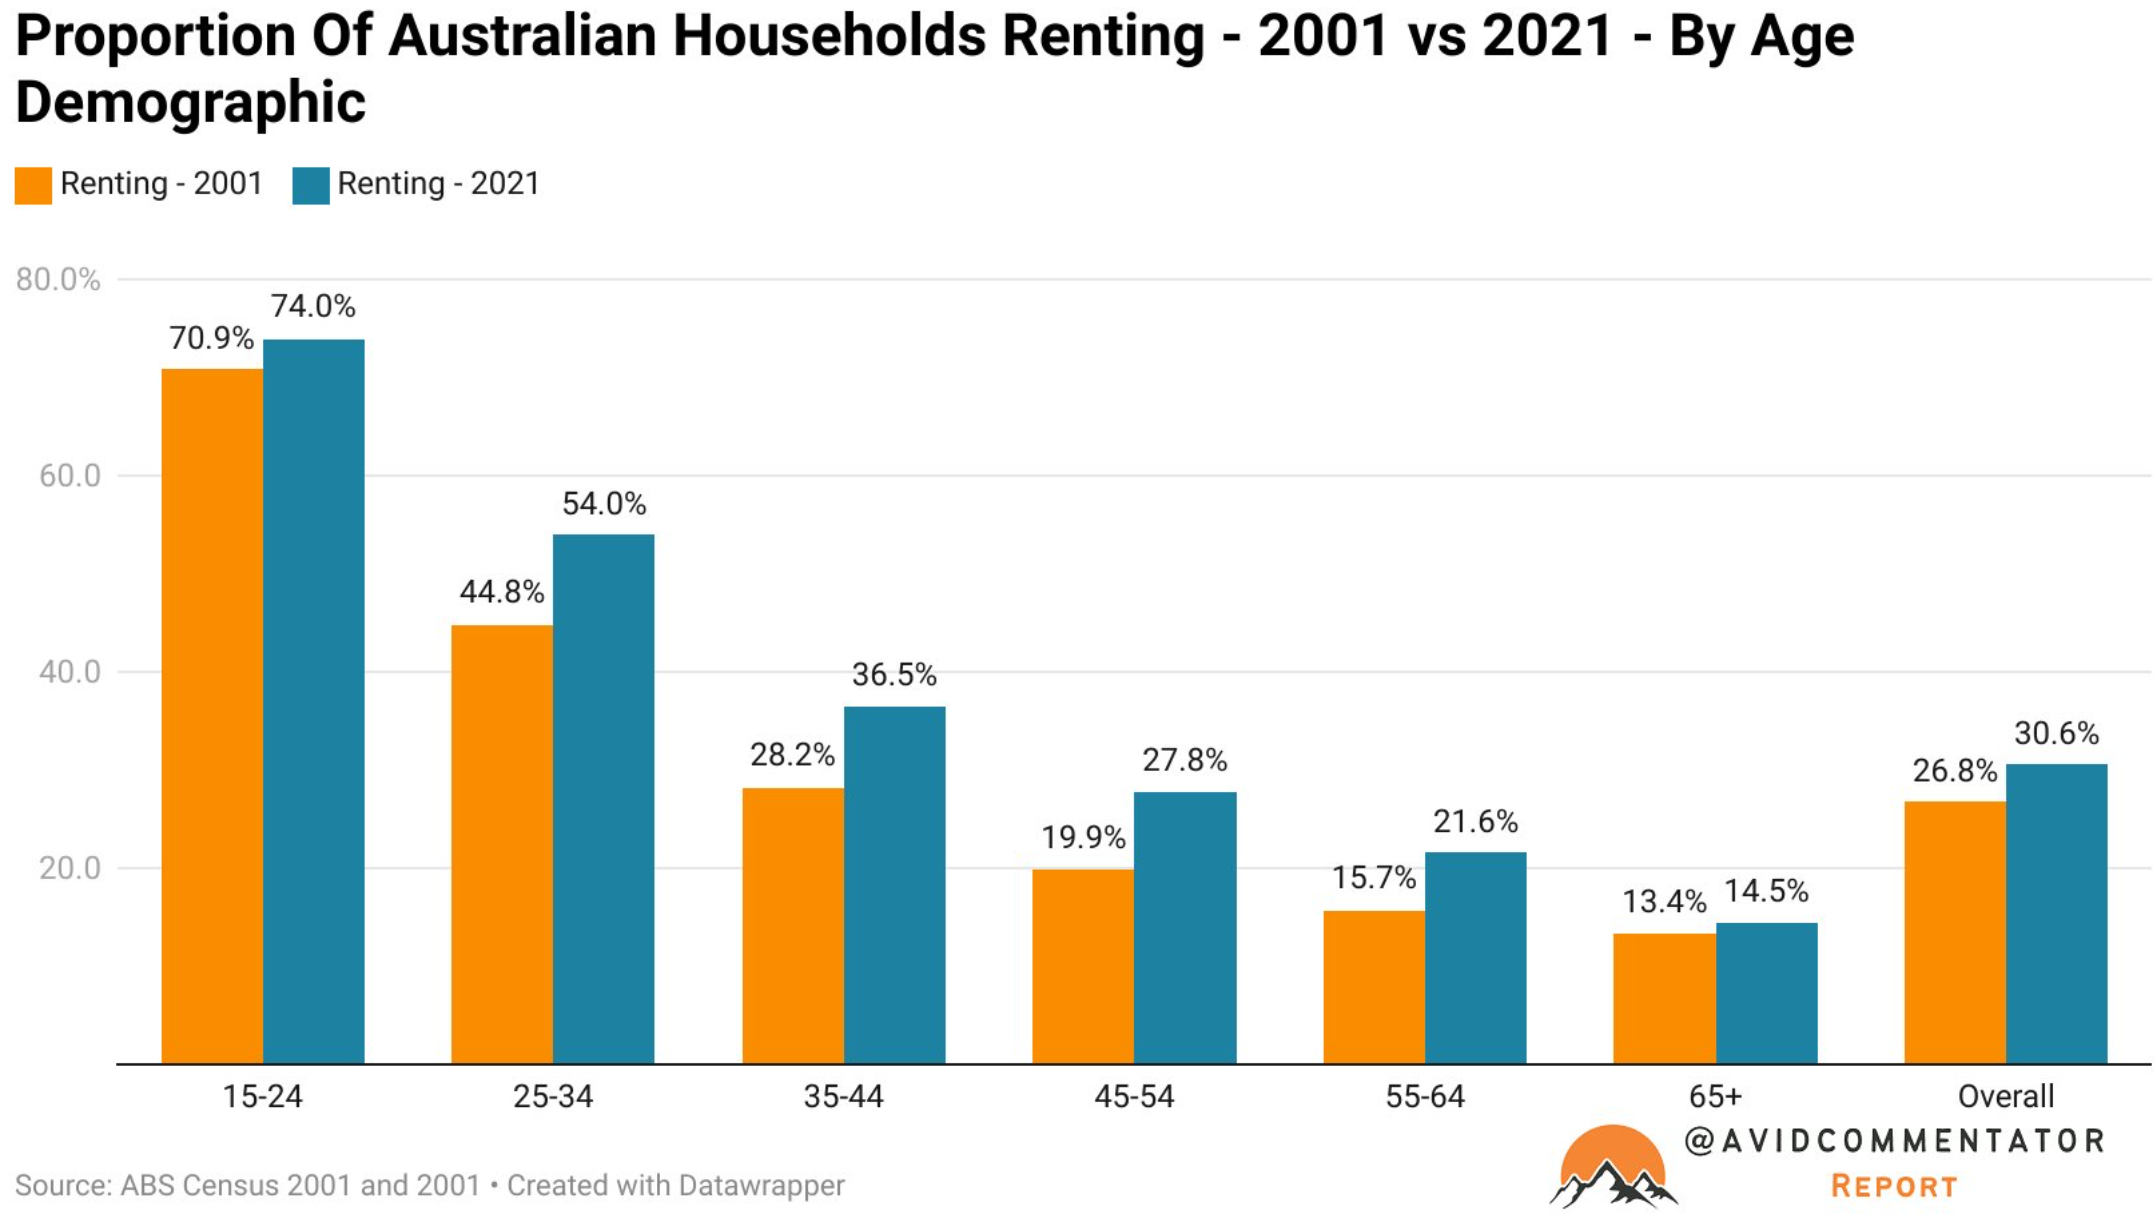 Proportion of Australians renting